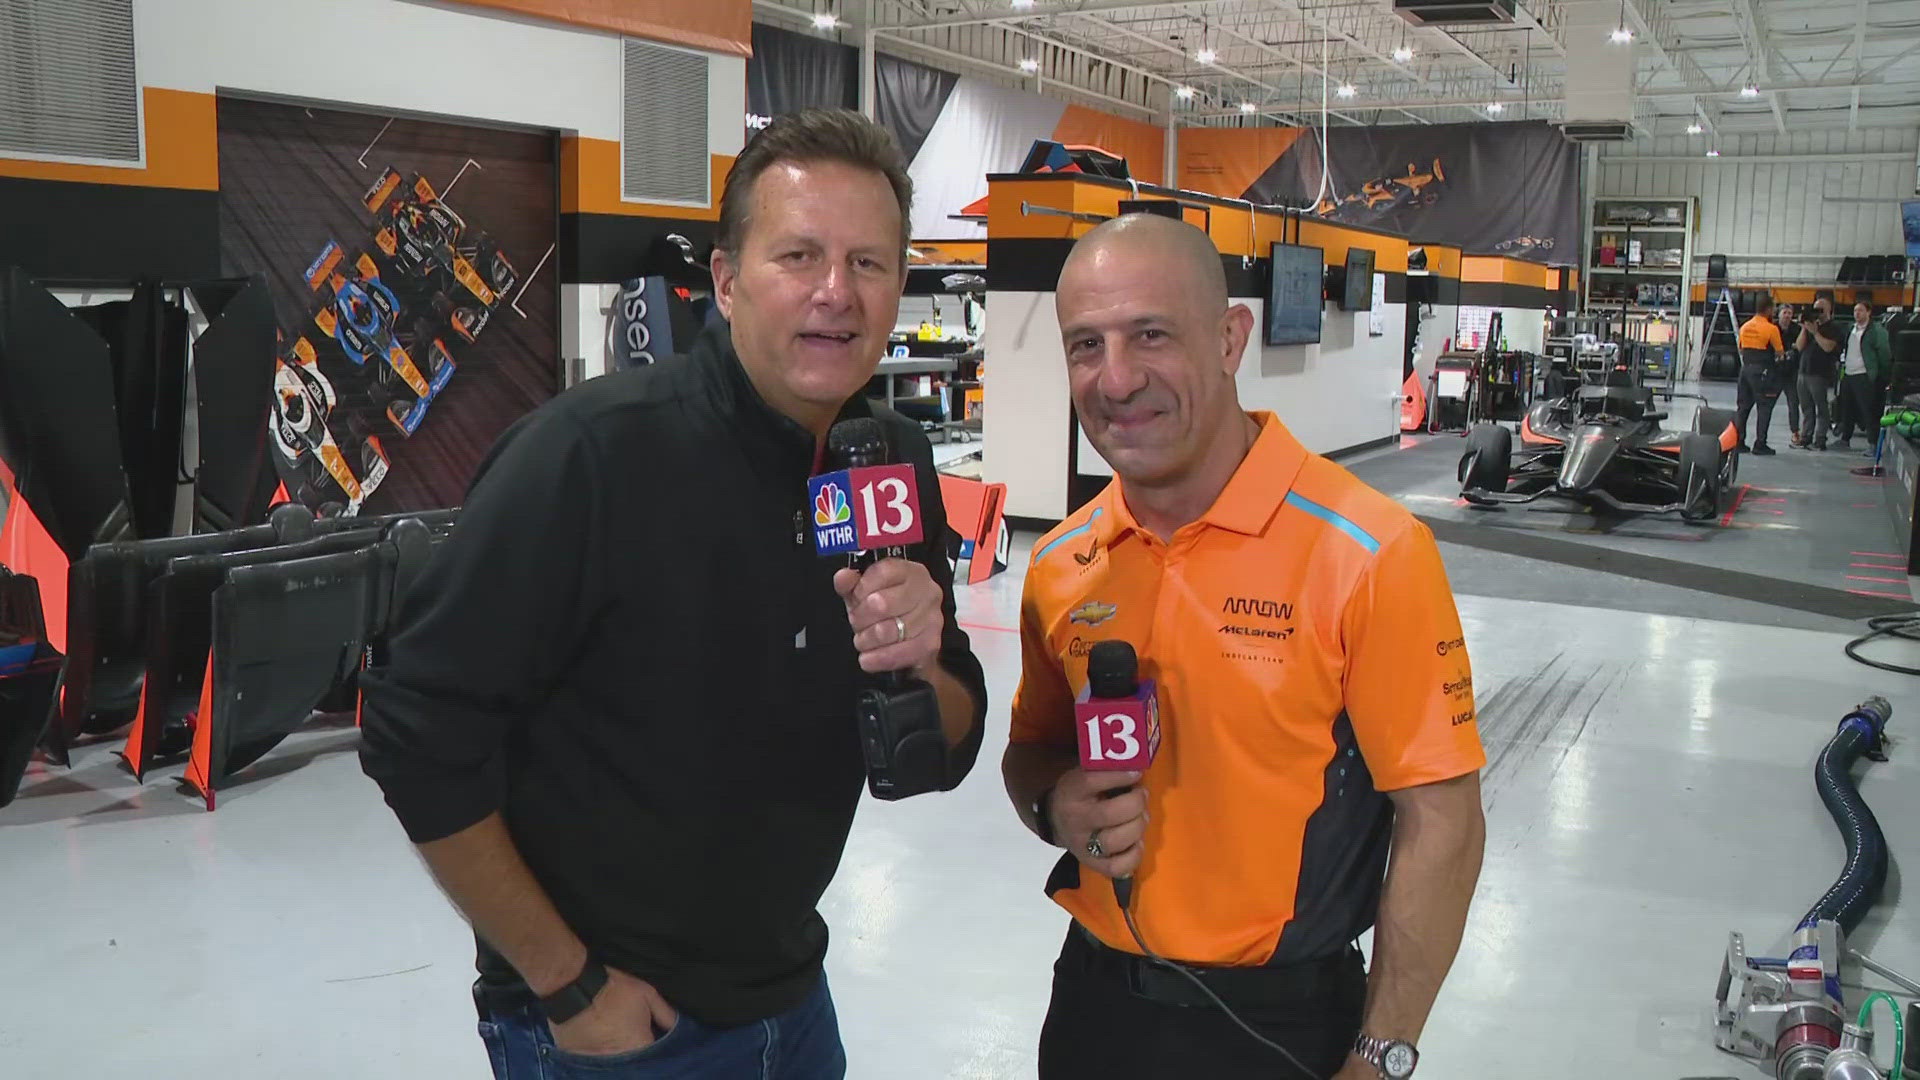 13Sports director Dave Calabro heads to the McLaren IndyCar team headquarters on his weekly quest to find some Good News!